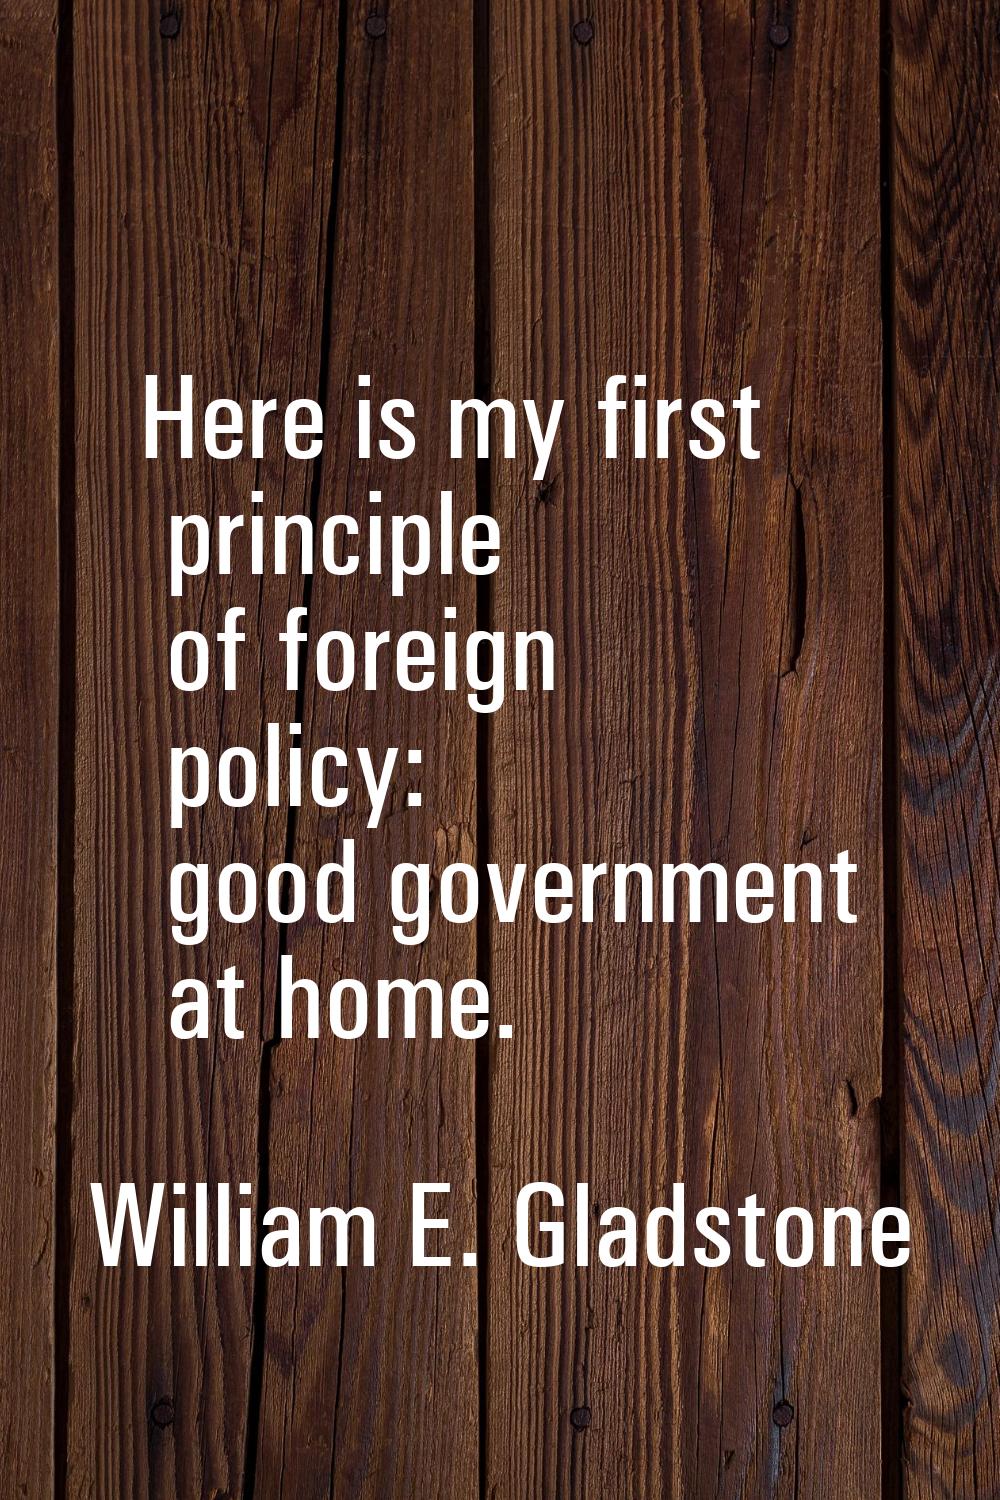 Here is my first principle of foreign policy: good government at home.